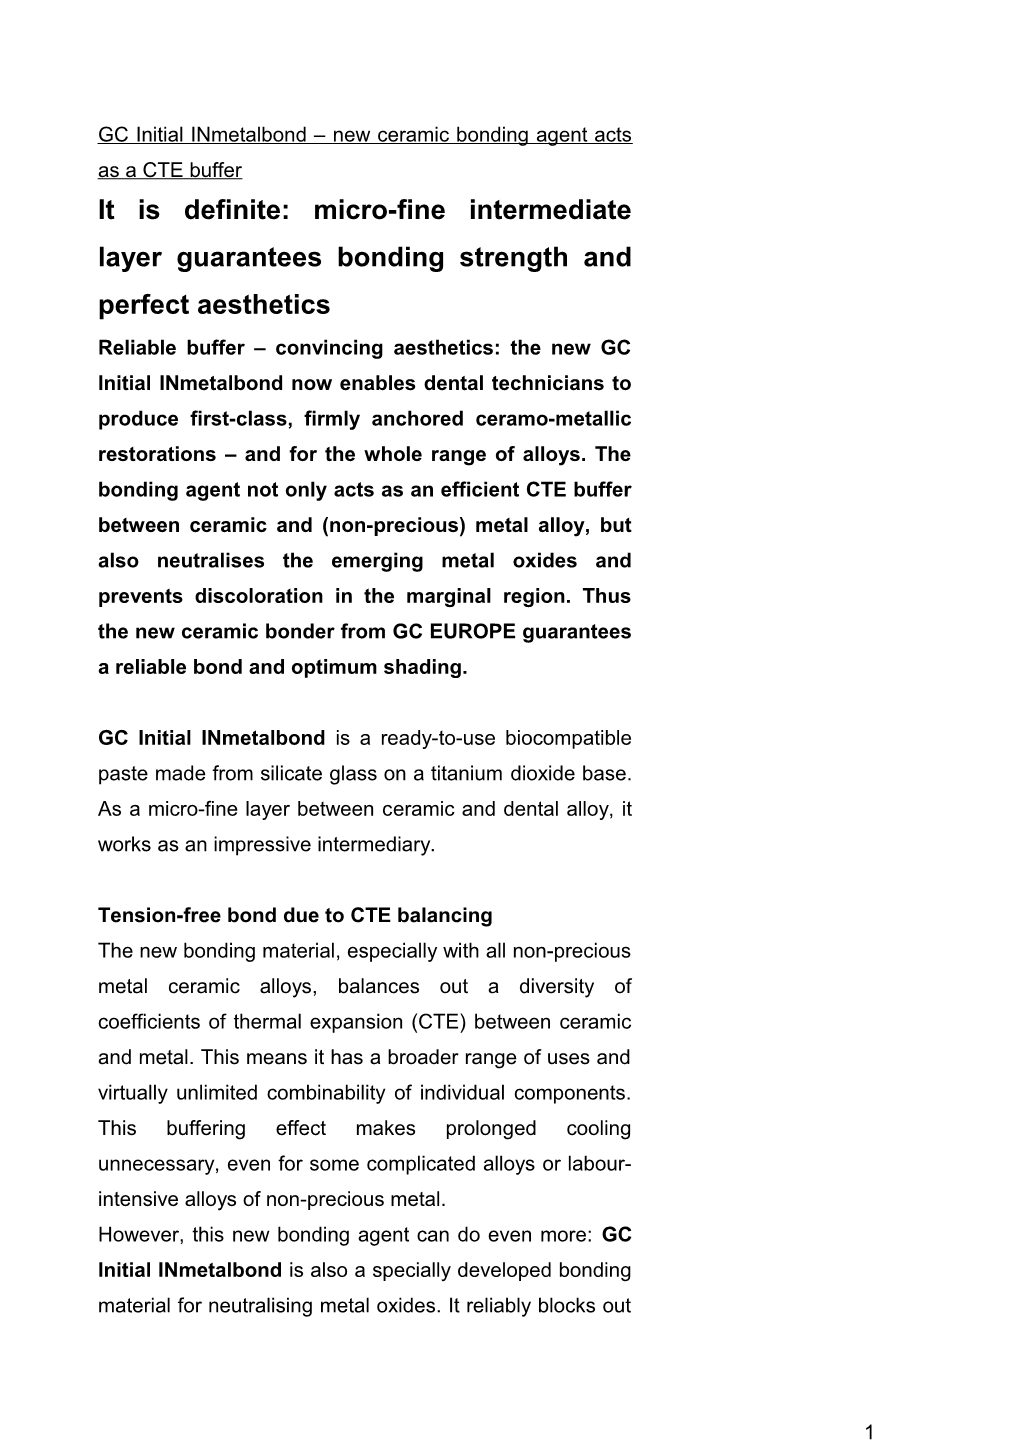 GC Initial Inmetalbond New Ceramic Bonding Agent Acts As a TCE Buffer